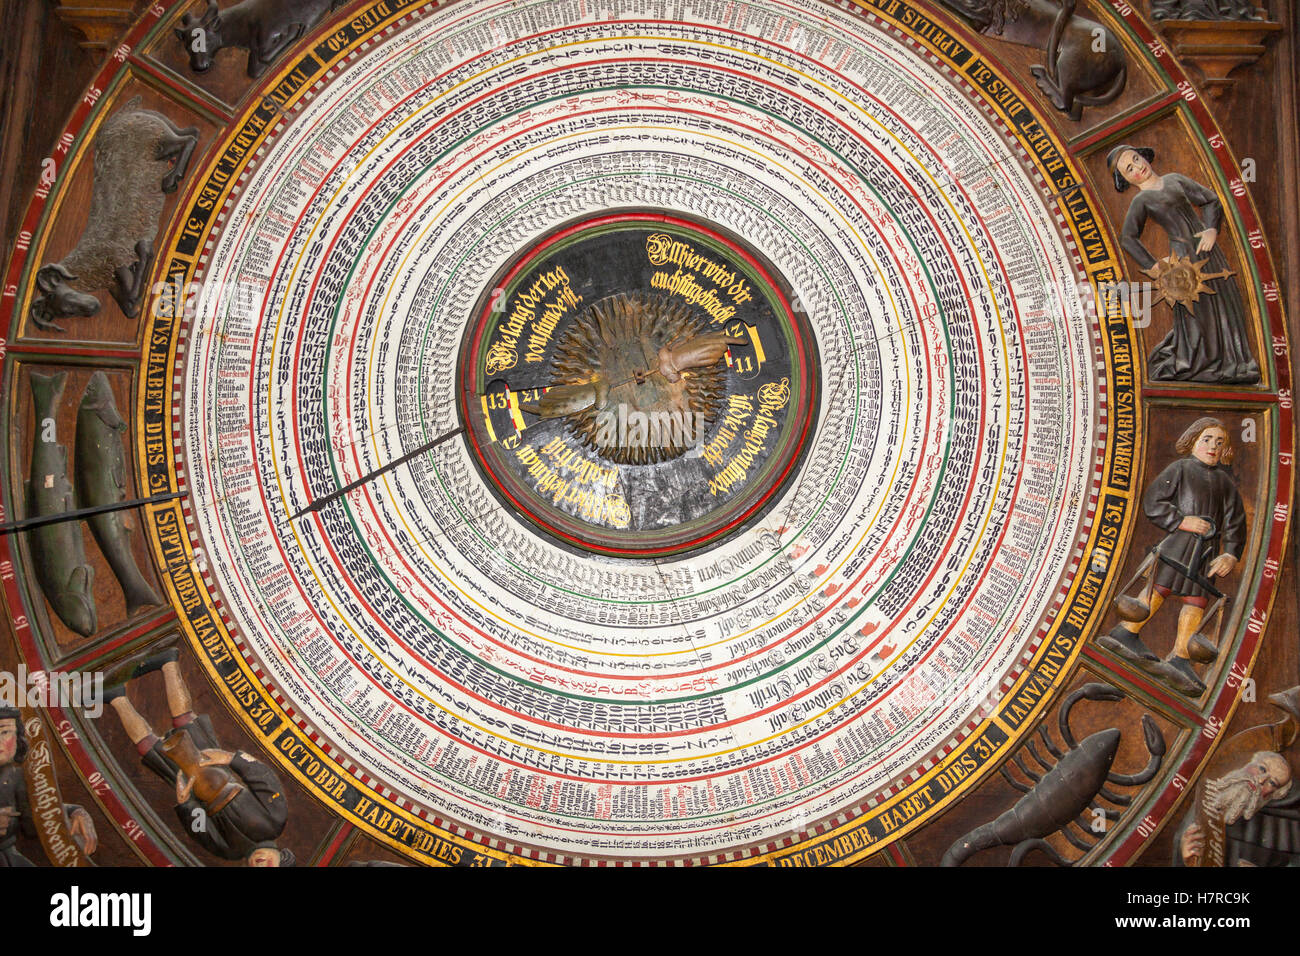 Lower part of Astronomical clock, St Mary’s Church, Marienkirche, Rostock, Mecklenburg-Vorpommern, Germany Stock Photo